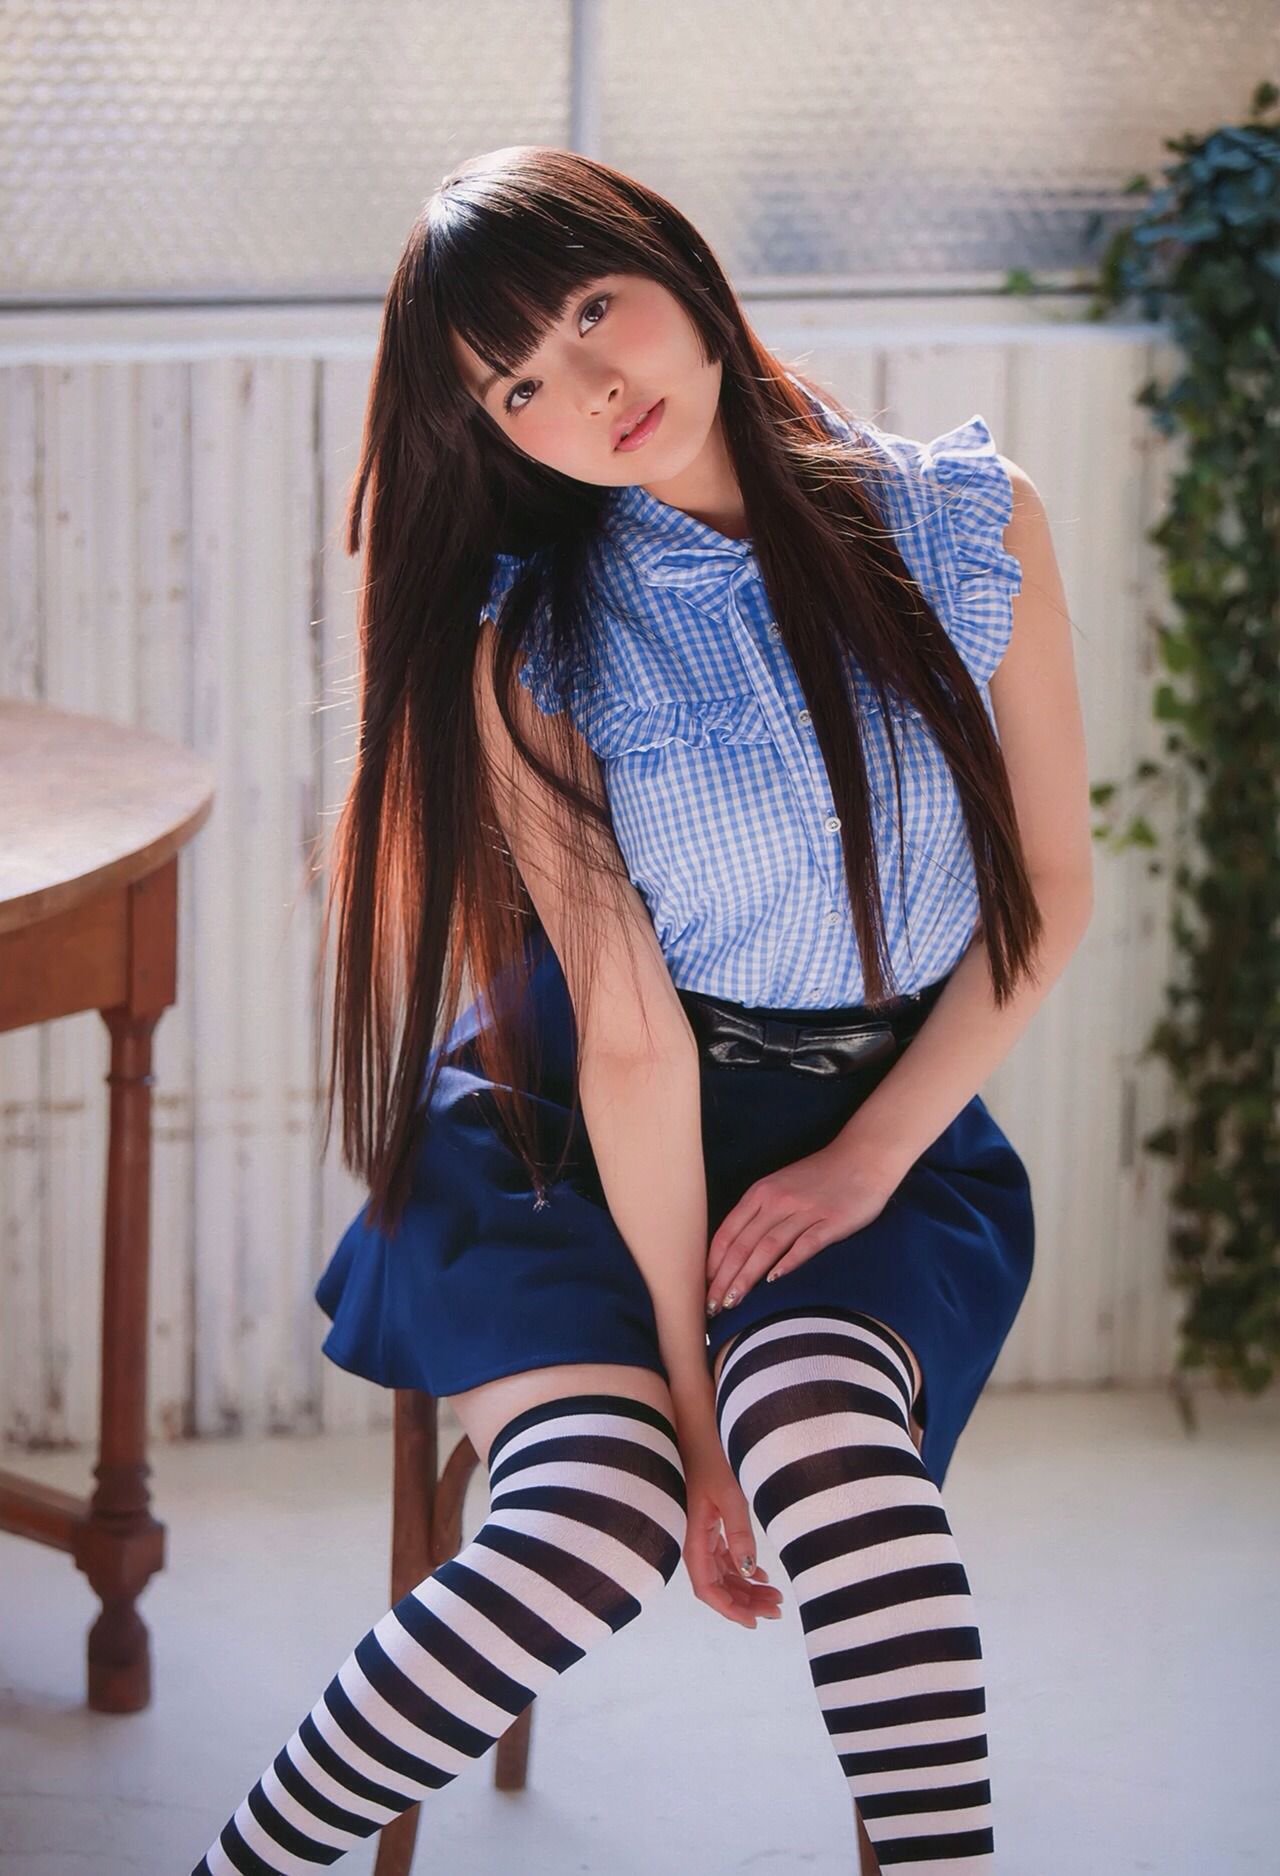 Sumire Uesaka "to emphasize the thigh... W] also erotic image offer Wwwwwww 7